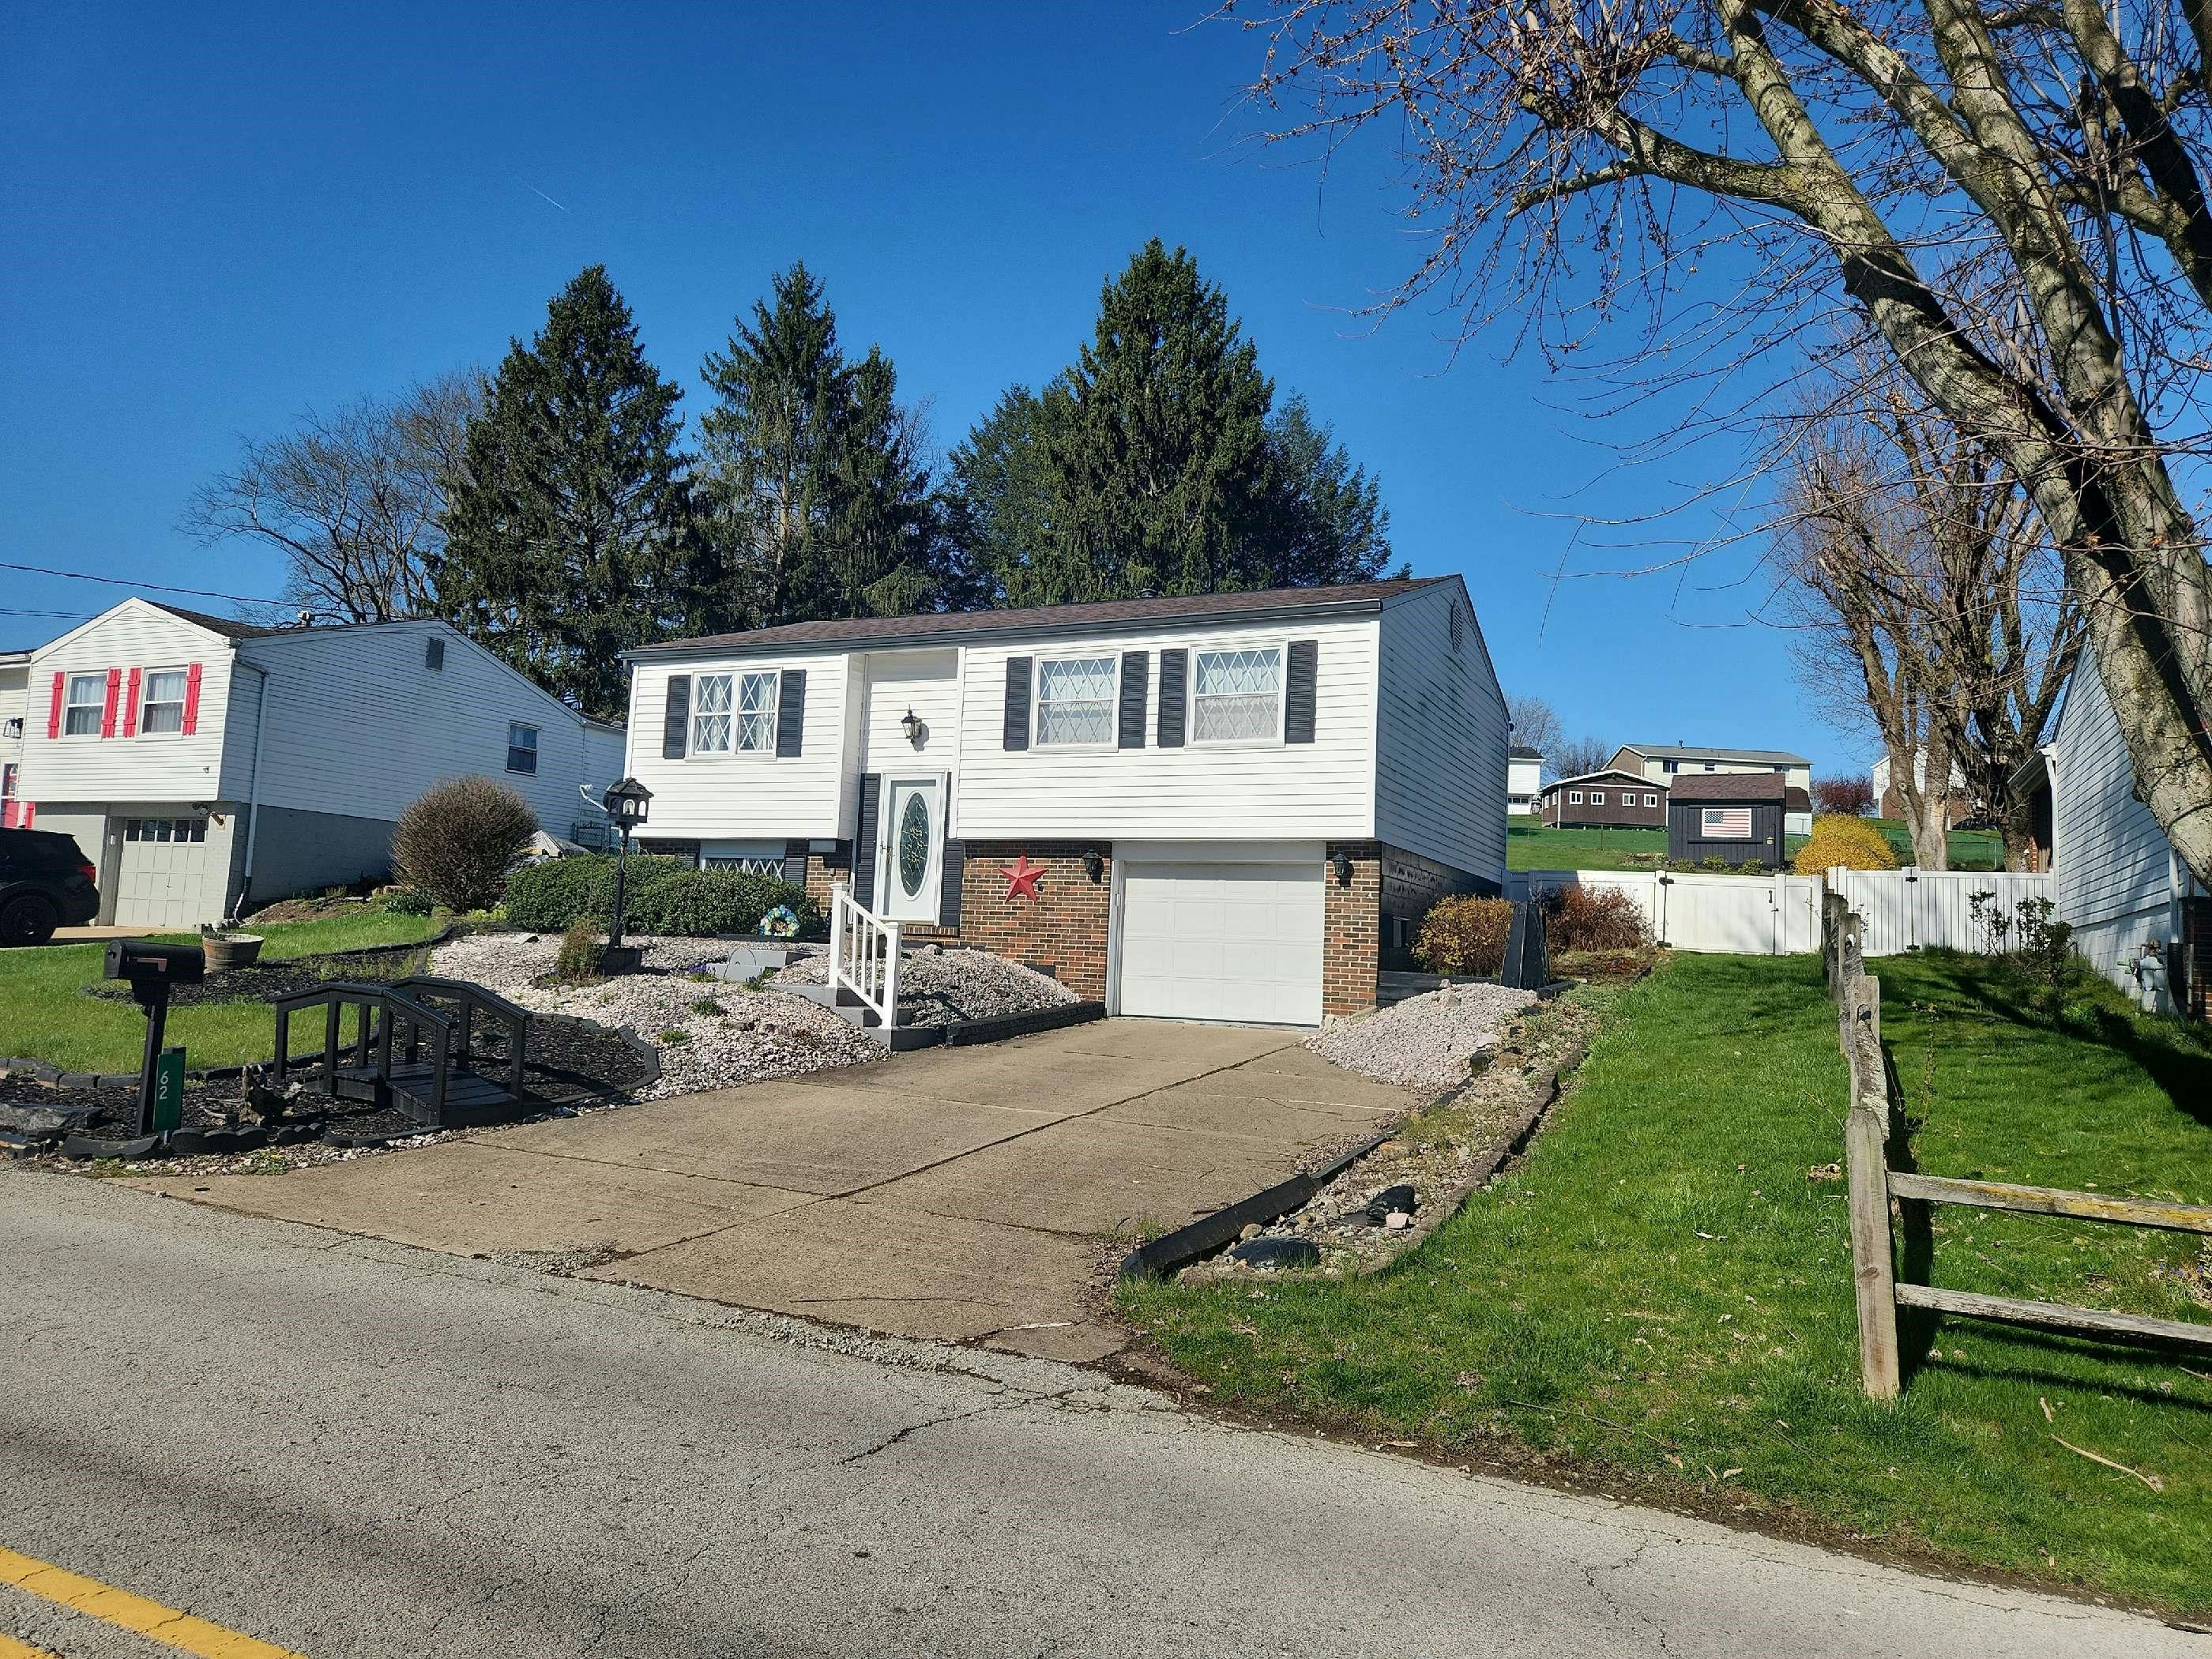 Fosterville Rd, Greensburg, PA 15601 #1